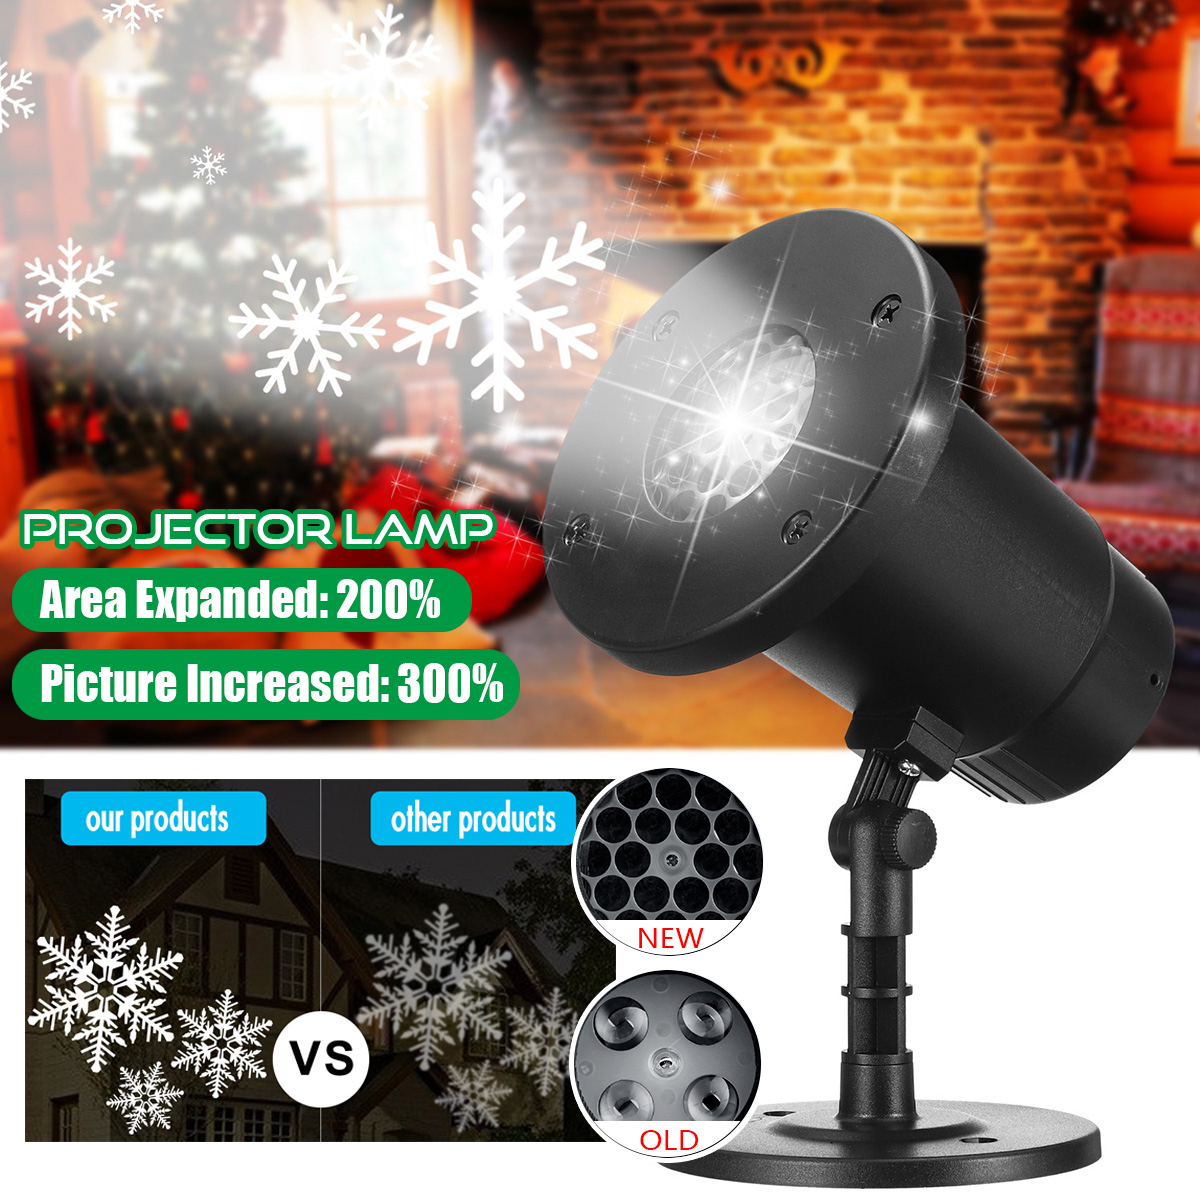 Portable-IP65-Waterproof-WhiteColorful-Snowflakes-Projector-Lamp-Outdoor-Work-Light-Landscape-Light--1605854